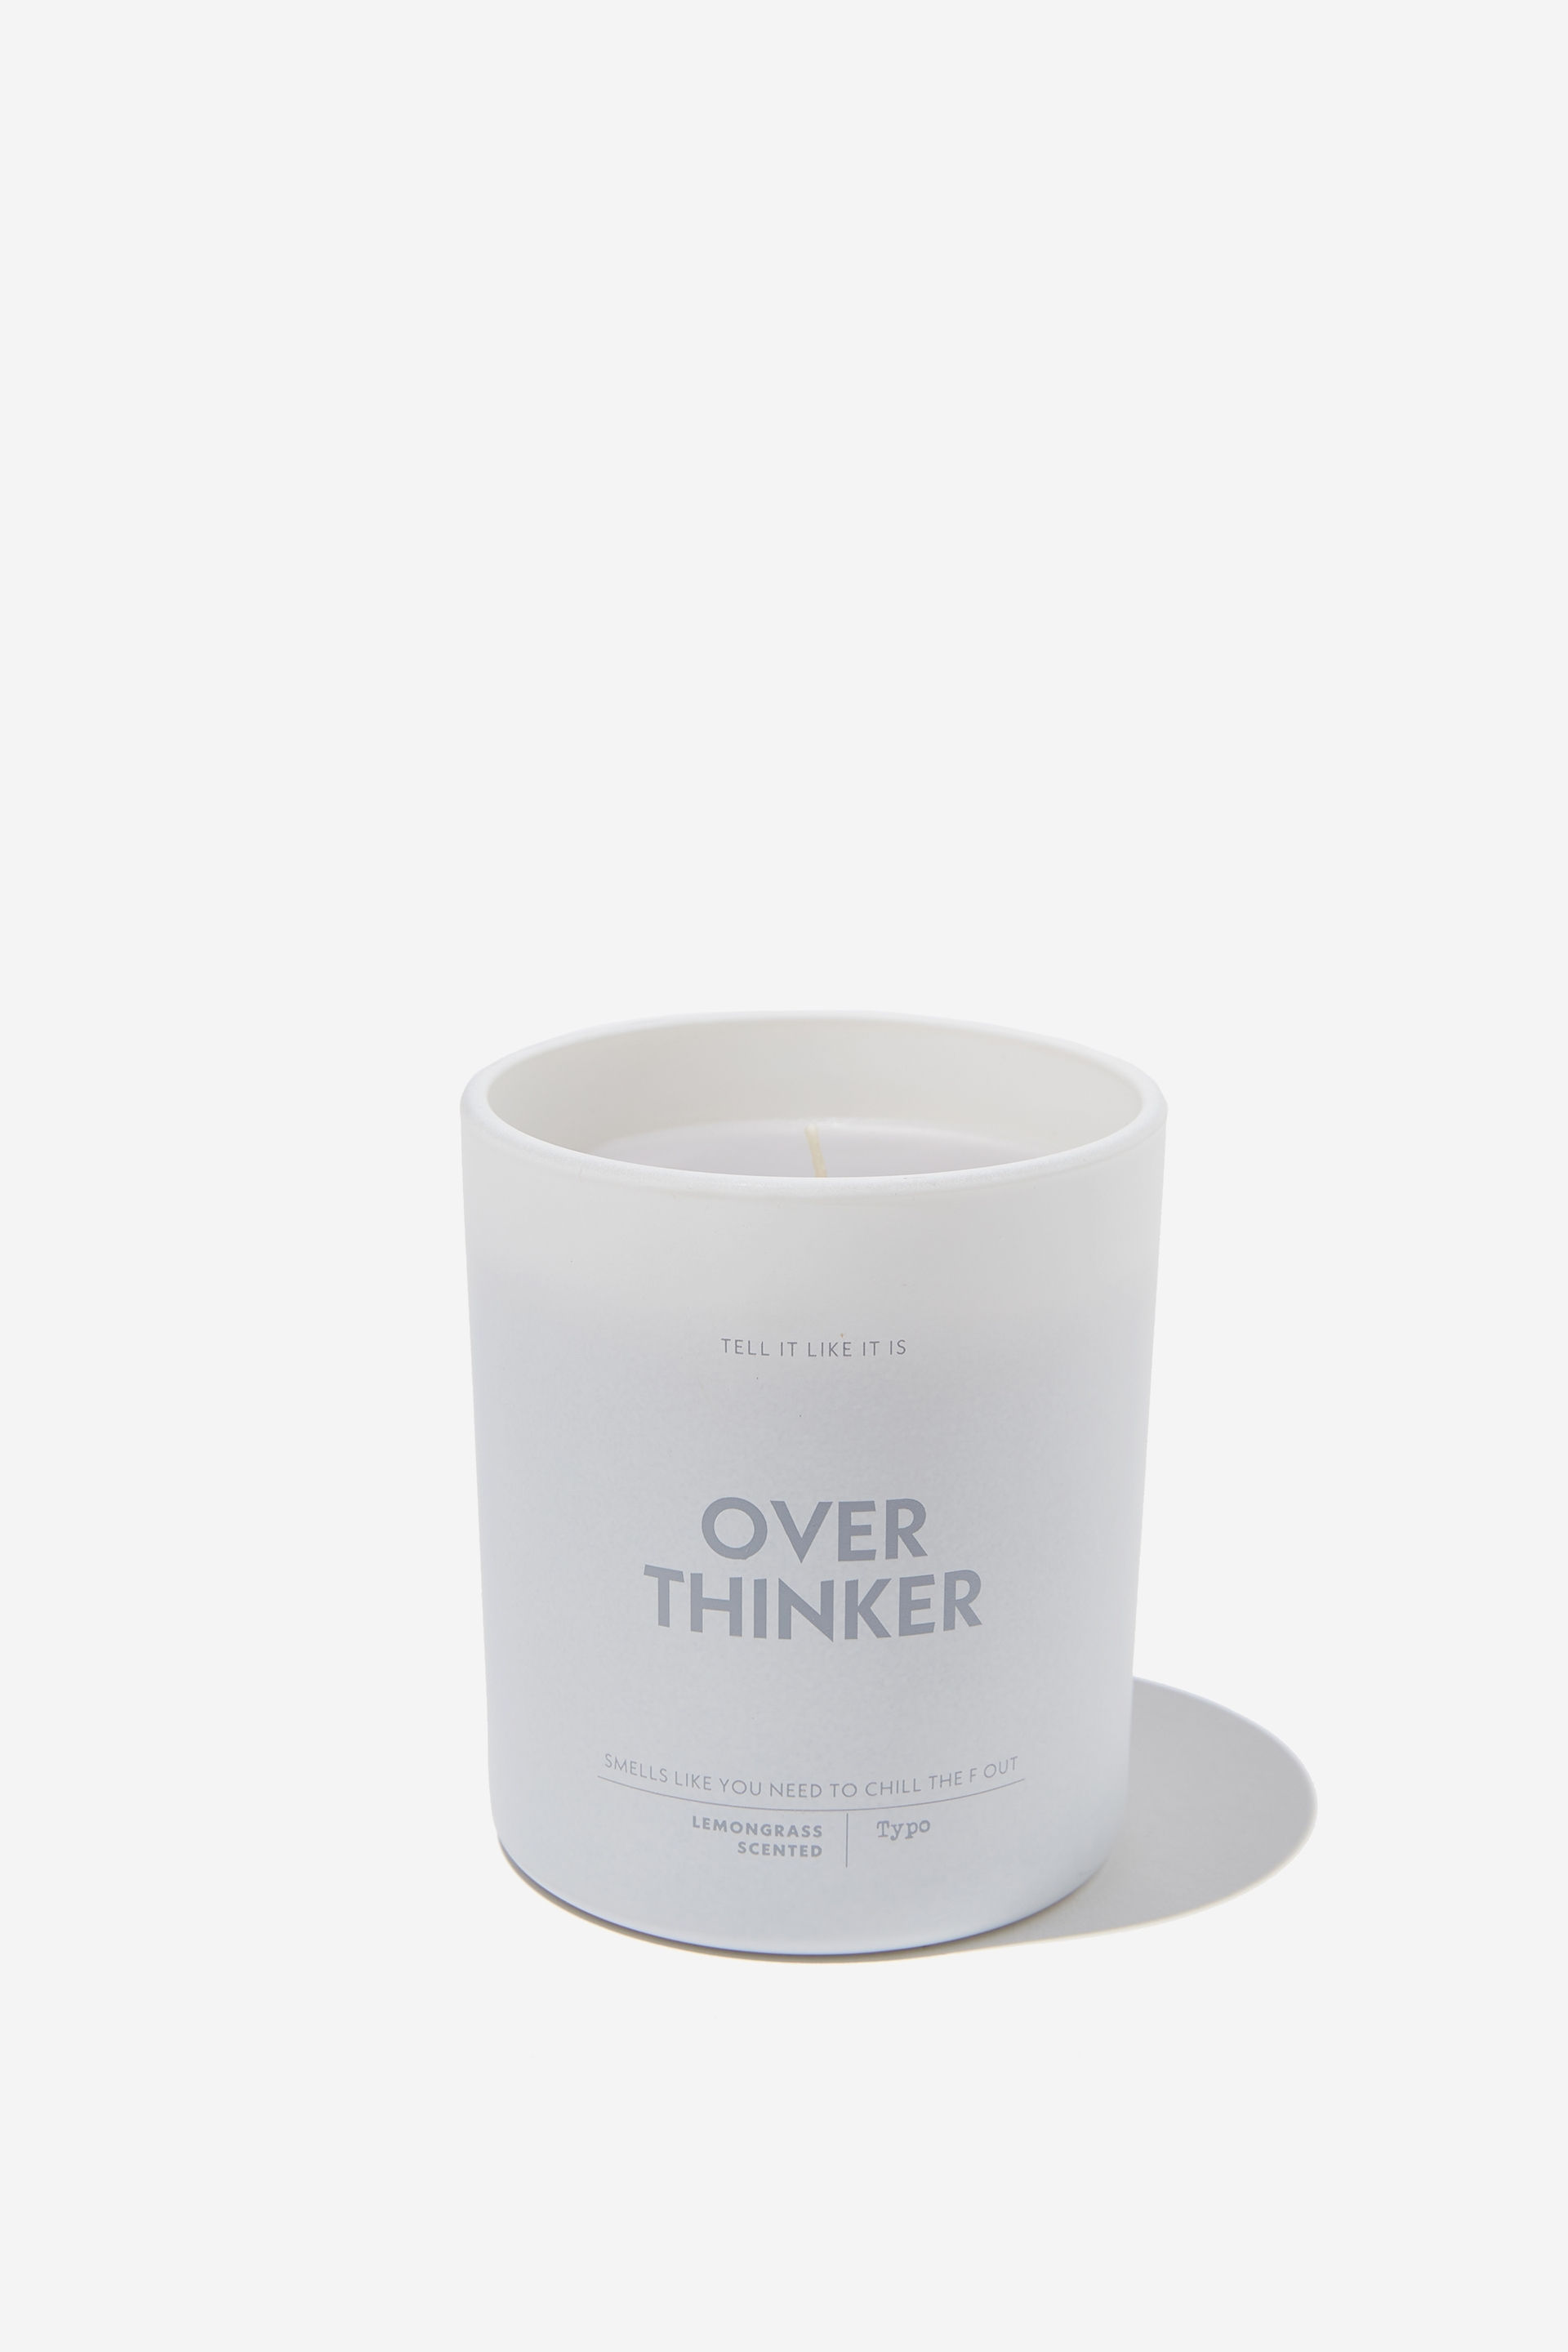 Typo - Tell It Like It Is Candle - Cool grey over thinker!